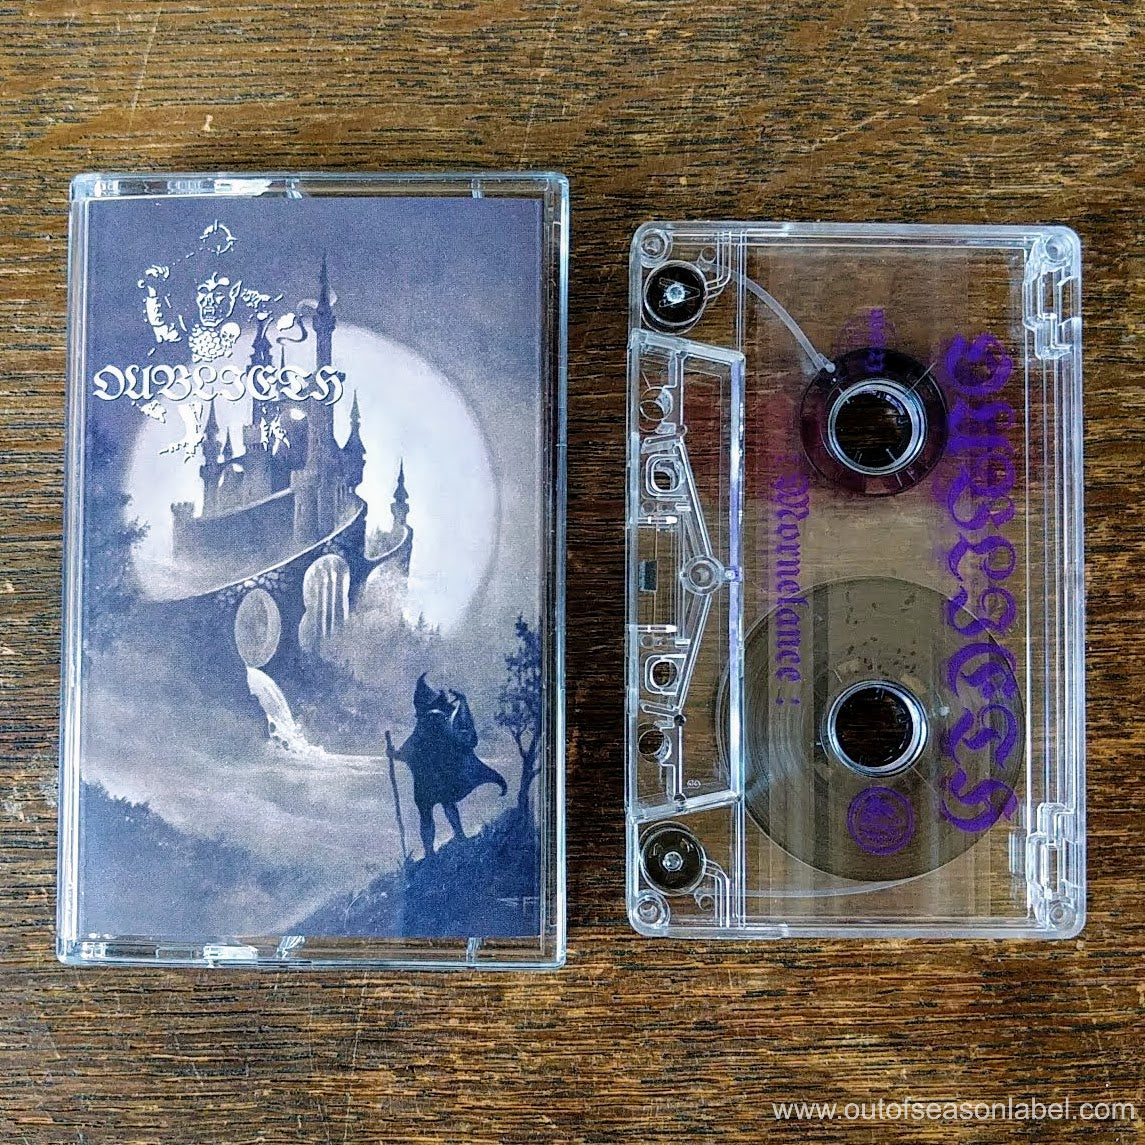 [SOLD OUT] OUBLIETH "Mornelance" Cassette Tape